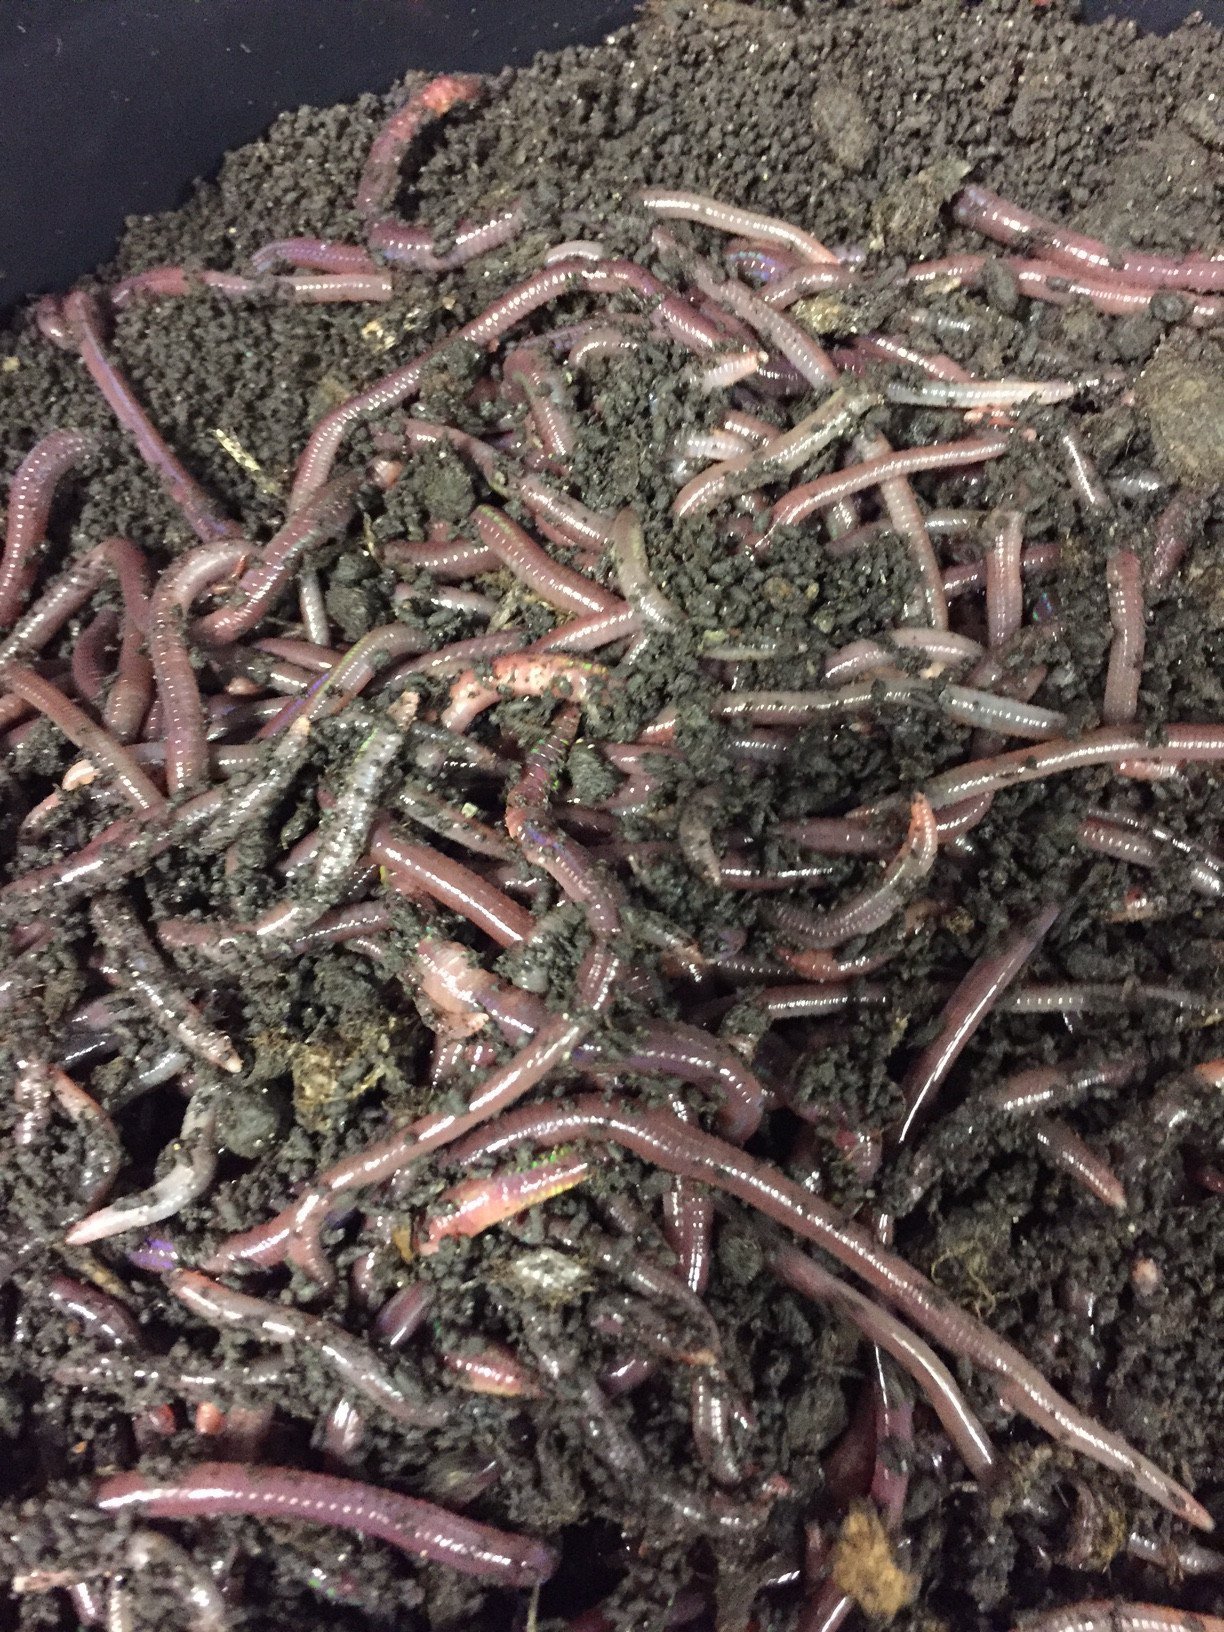 Worms for Sale -1lb - African Nightcrawlers- Buy Earthworms